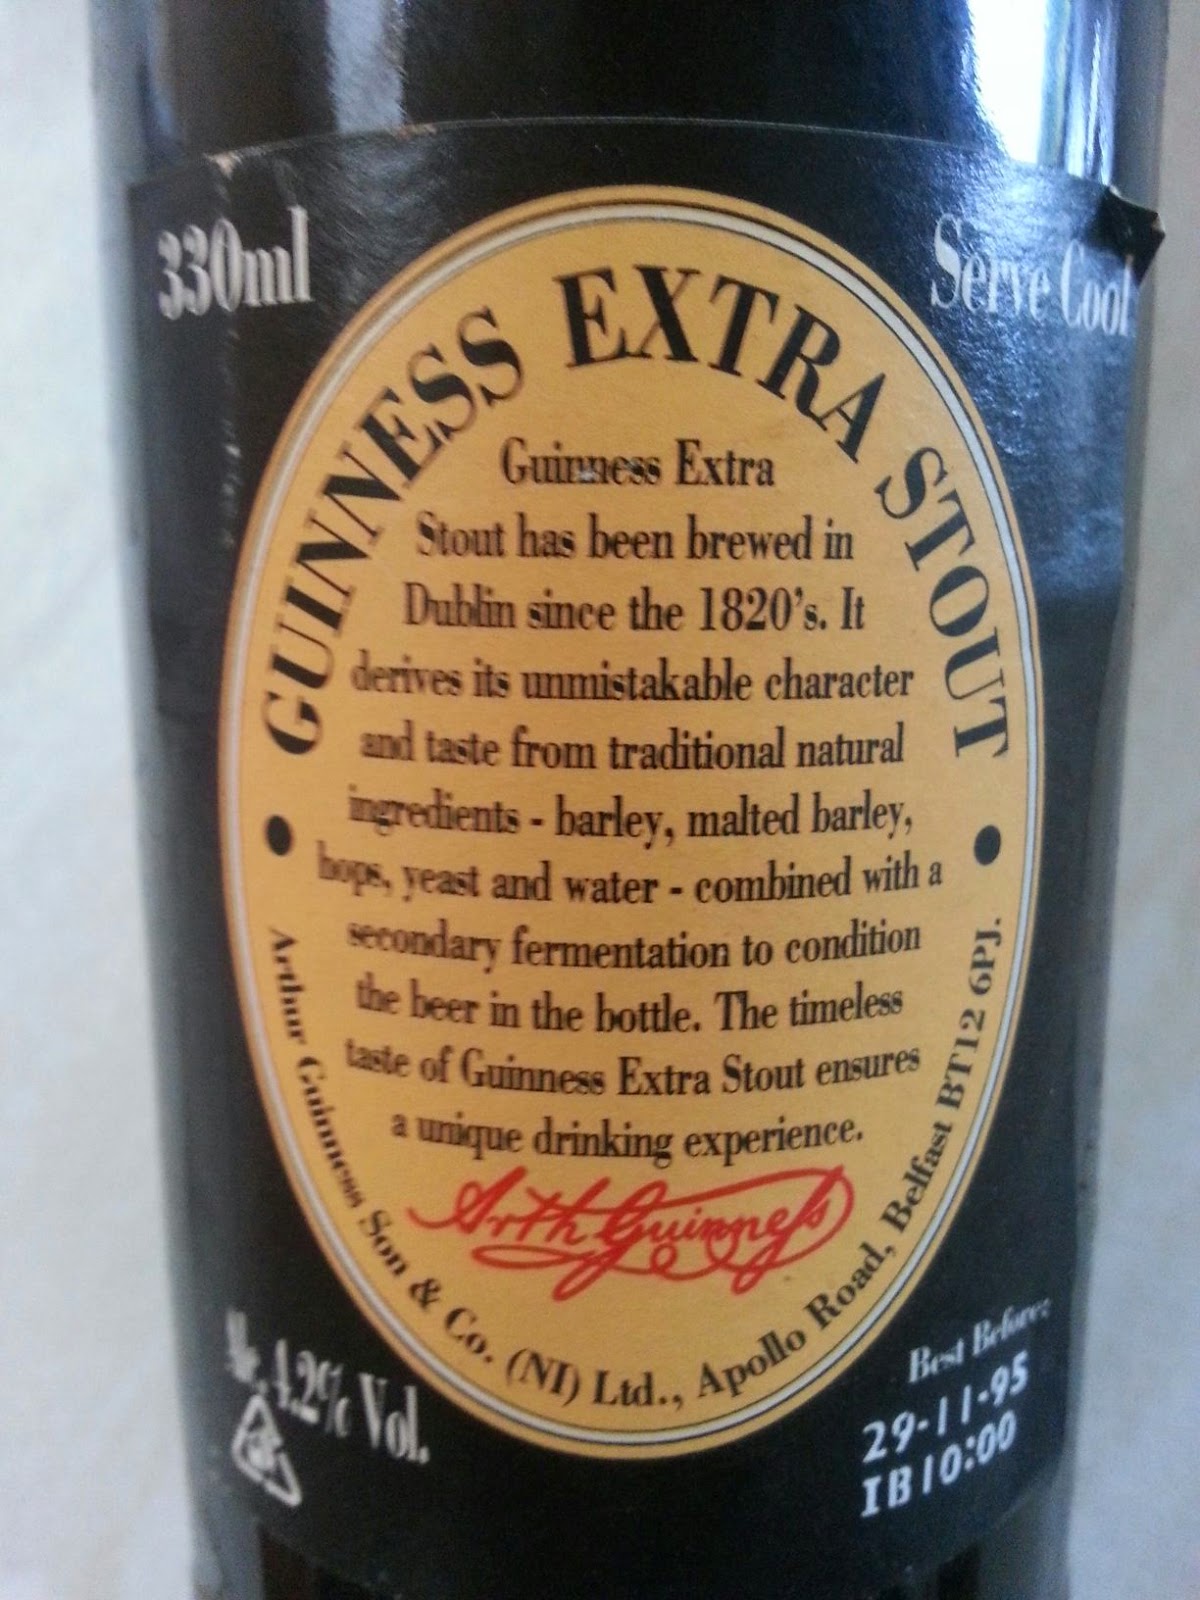 Tandleman's Beer Blog: When Guinness Was Real